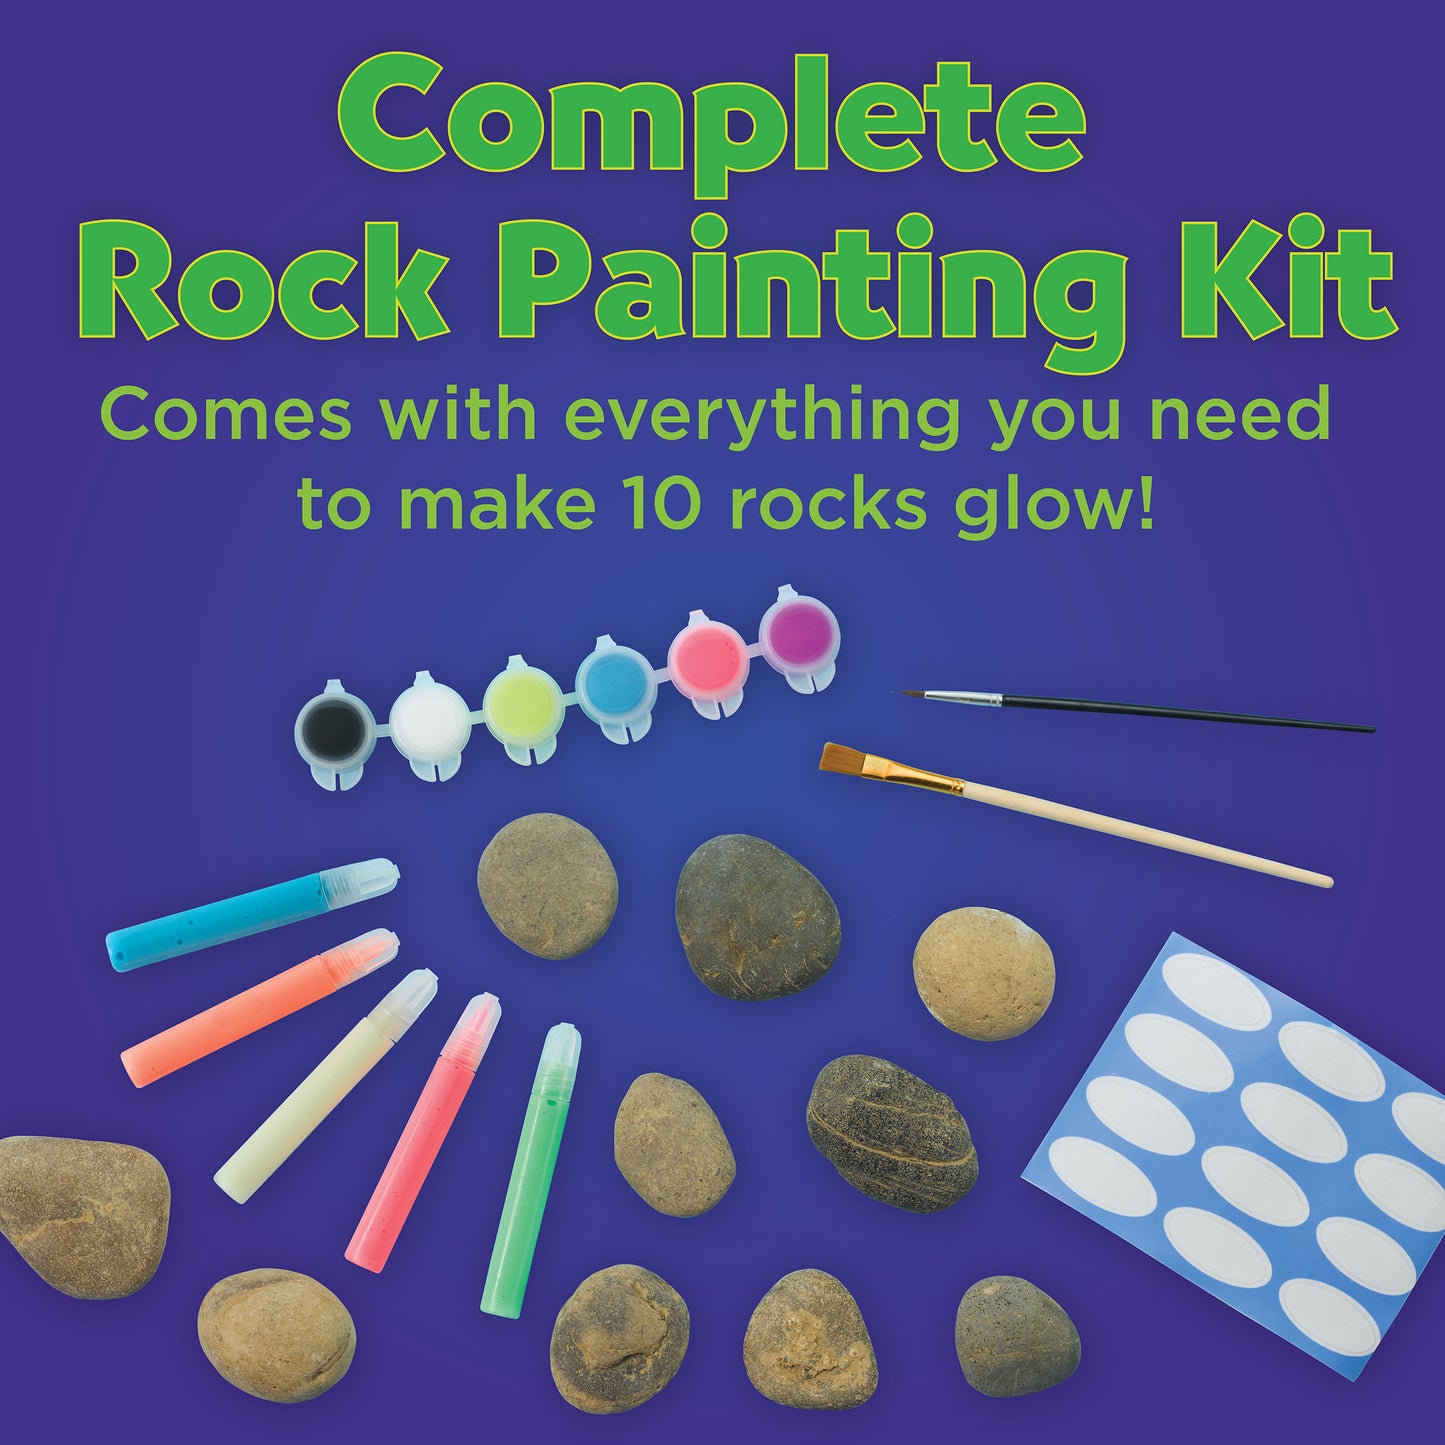 kit instructions- complete rock painting kit that comes with everything you need to make 10 rocks glow!